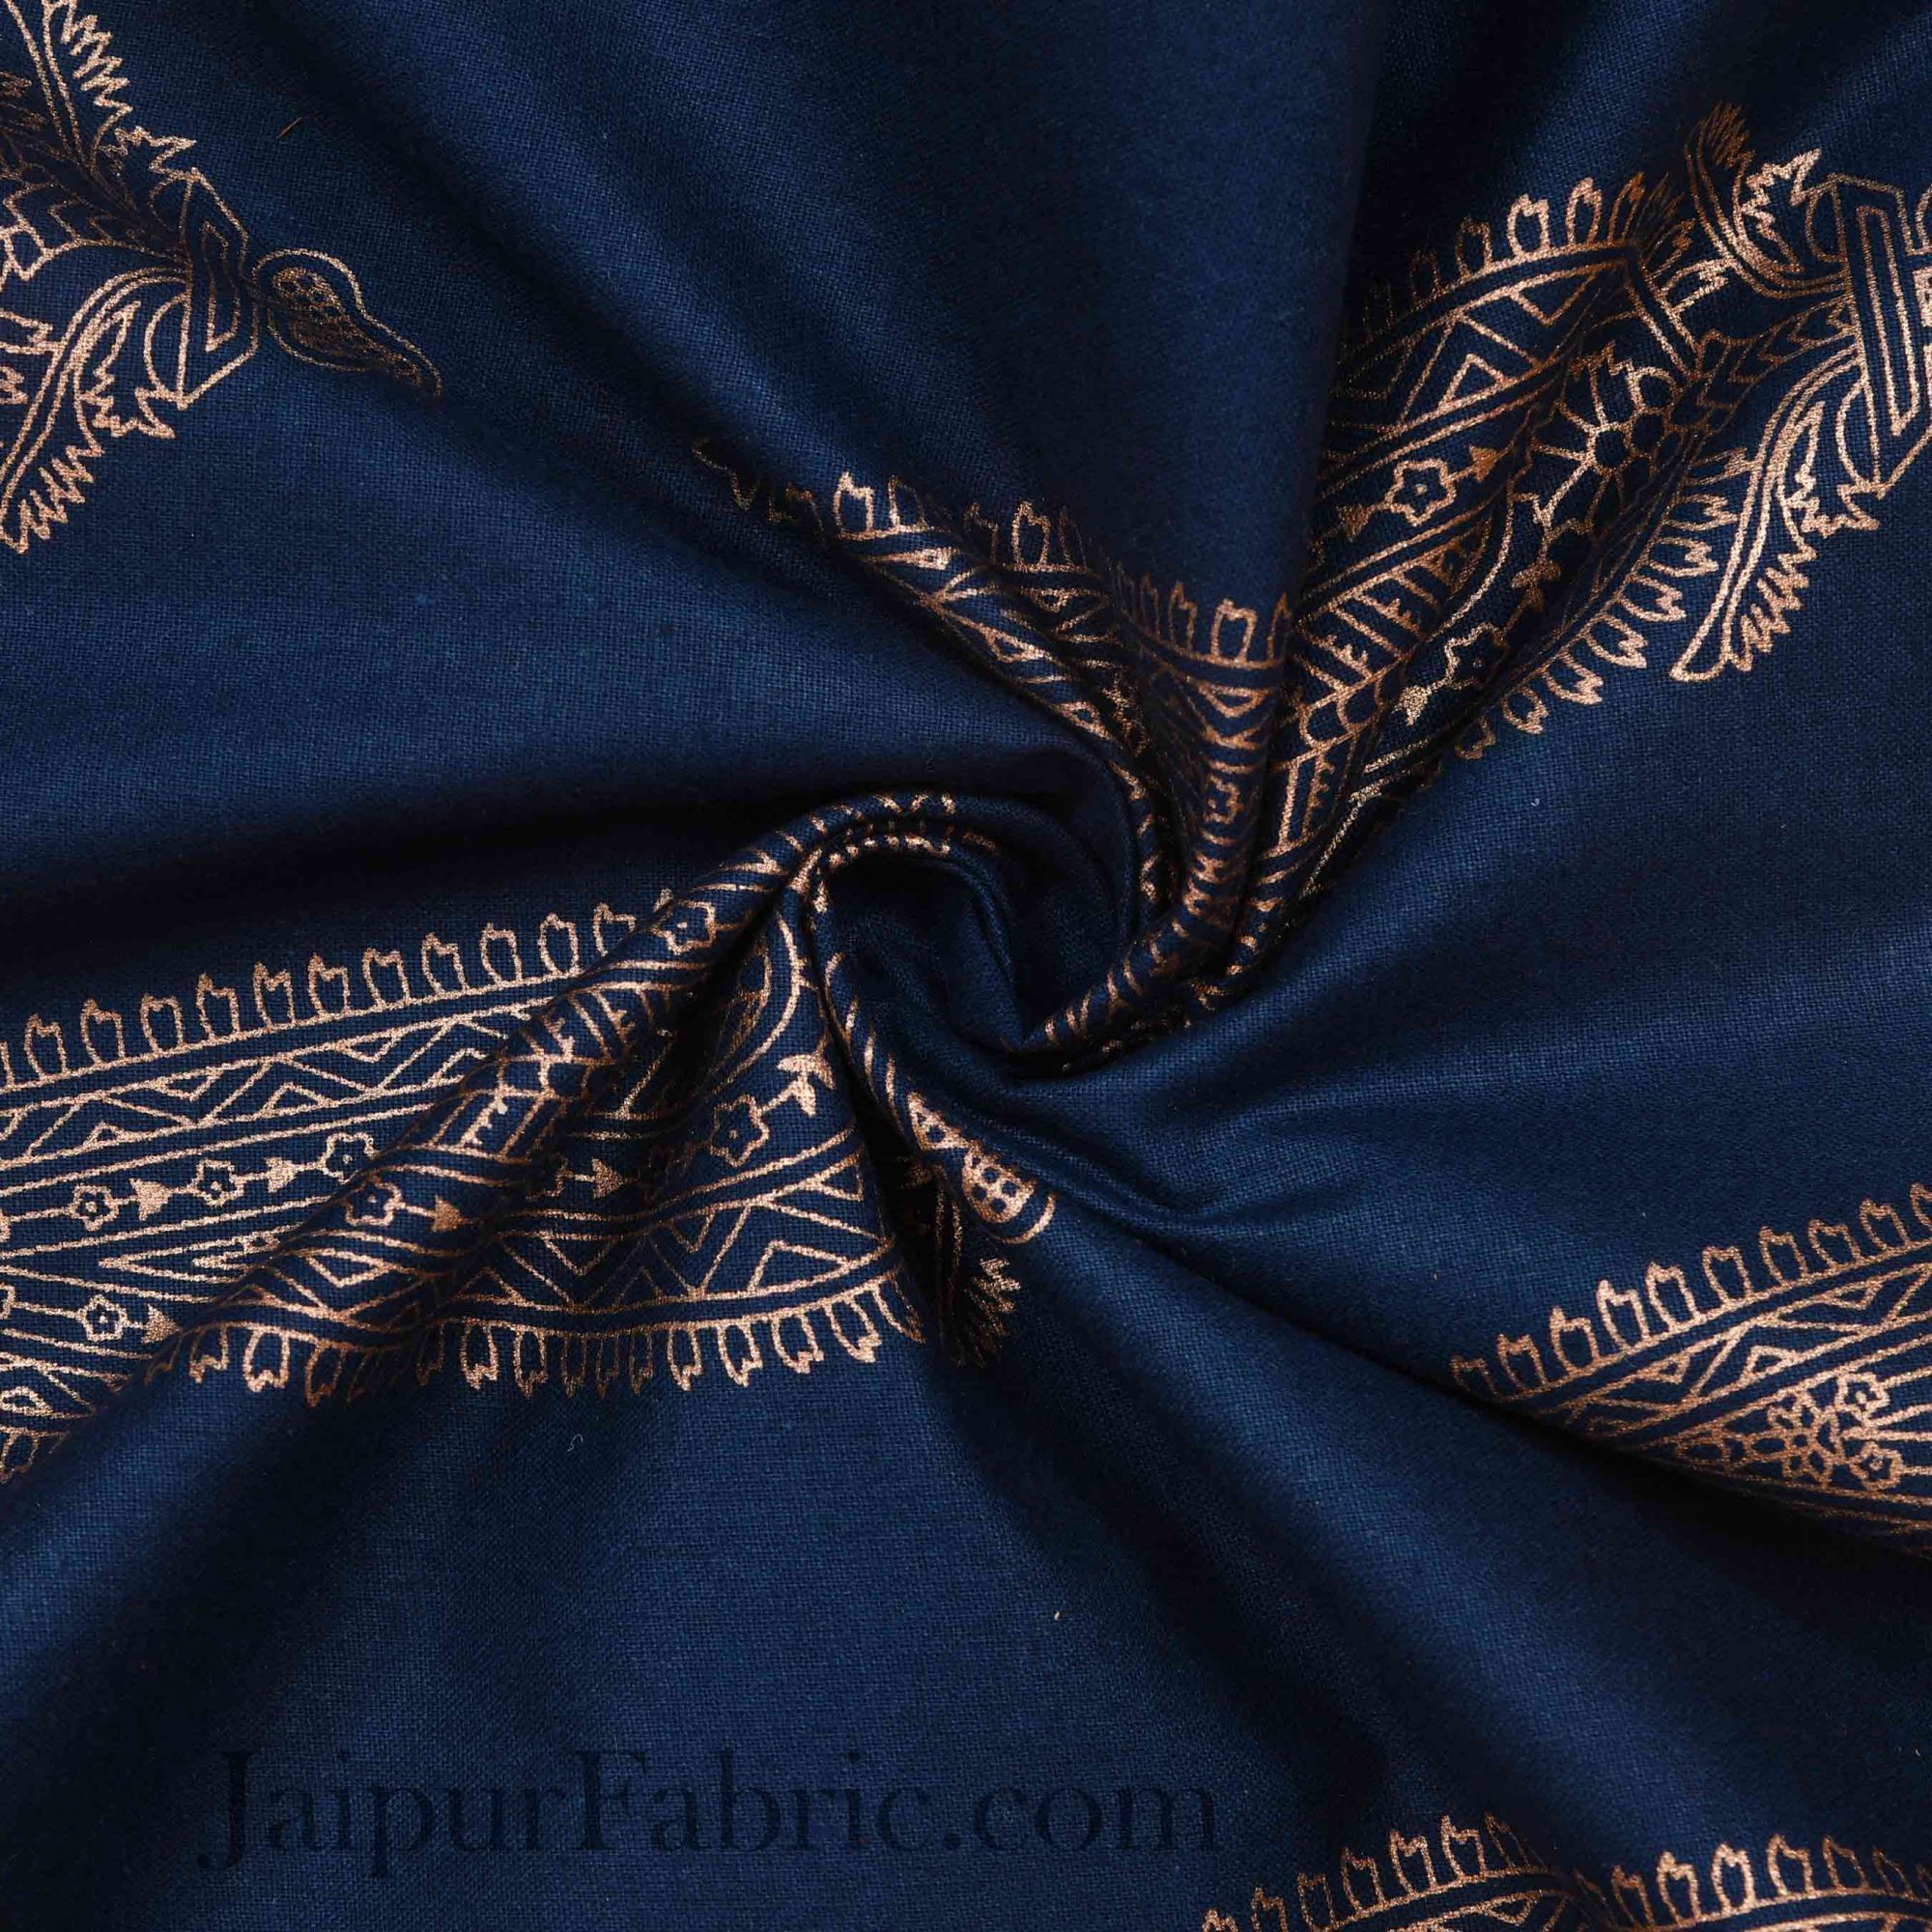 Patola BedSheet in Navy Blue Base Cream Border Gold Print Kerry Pattern Super Fine Cotton with 2 pillow covers